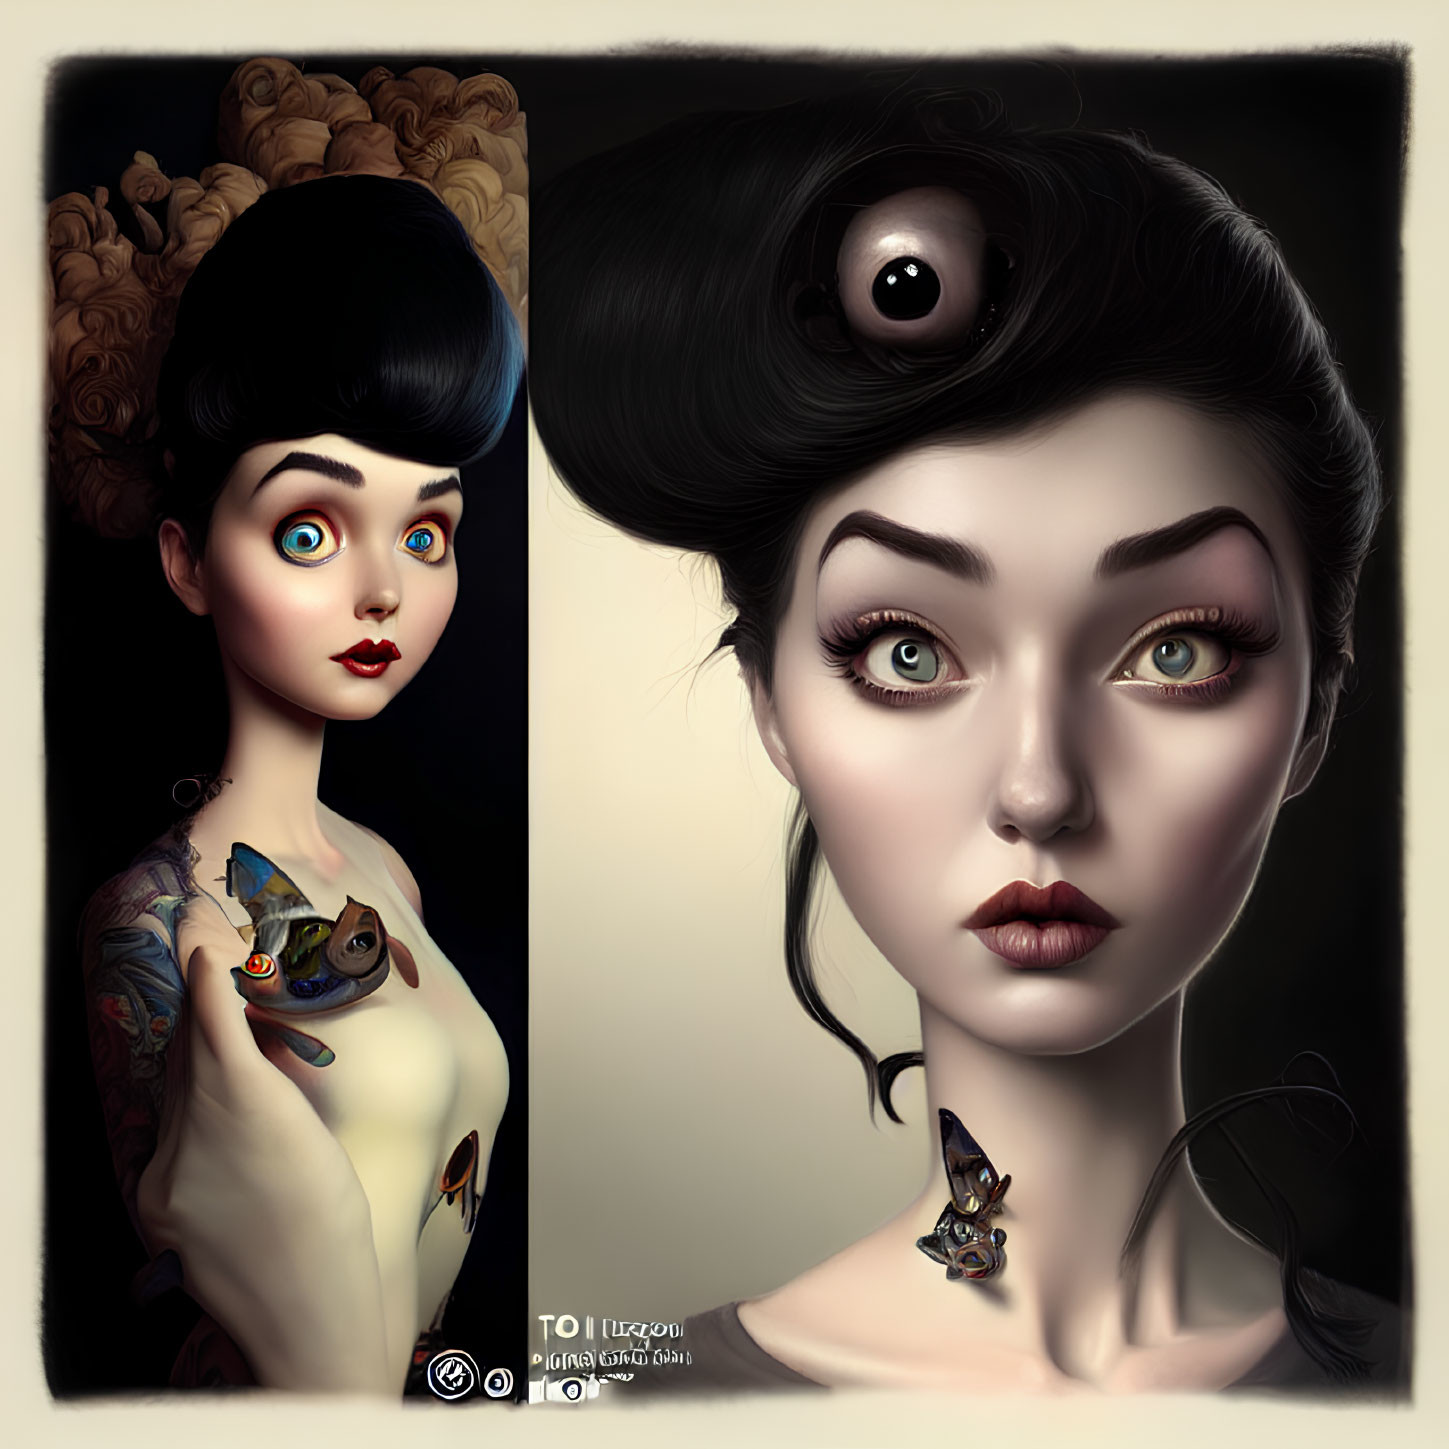 Portrait of woman with large eyes, tattoos, and whimsical elements